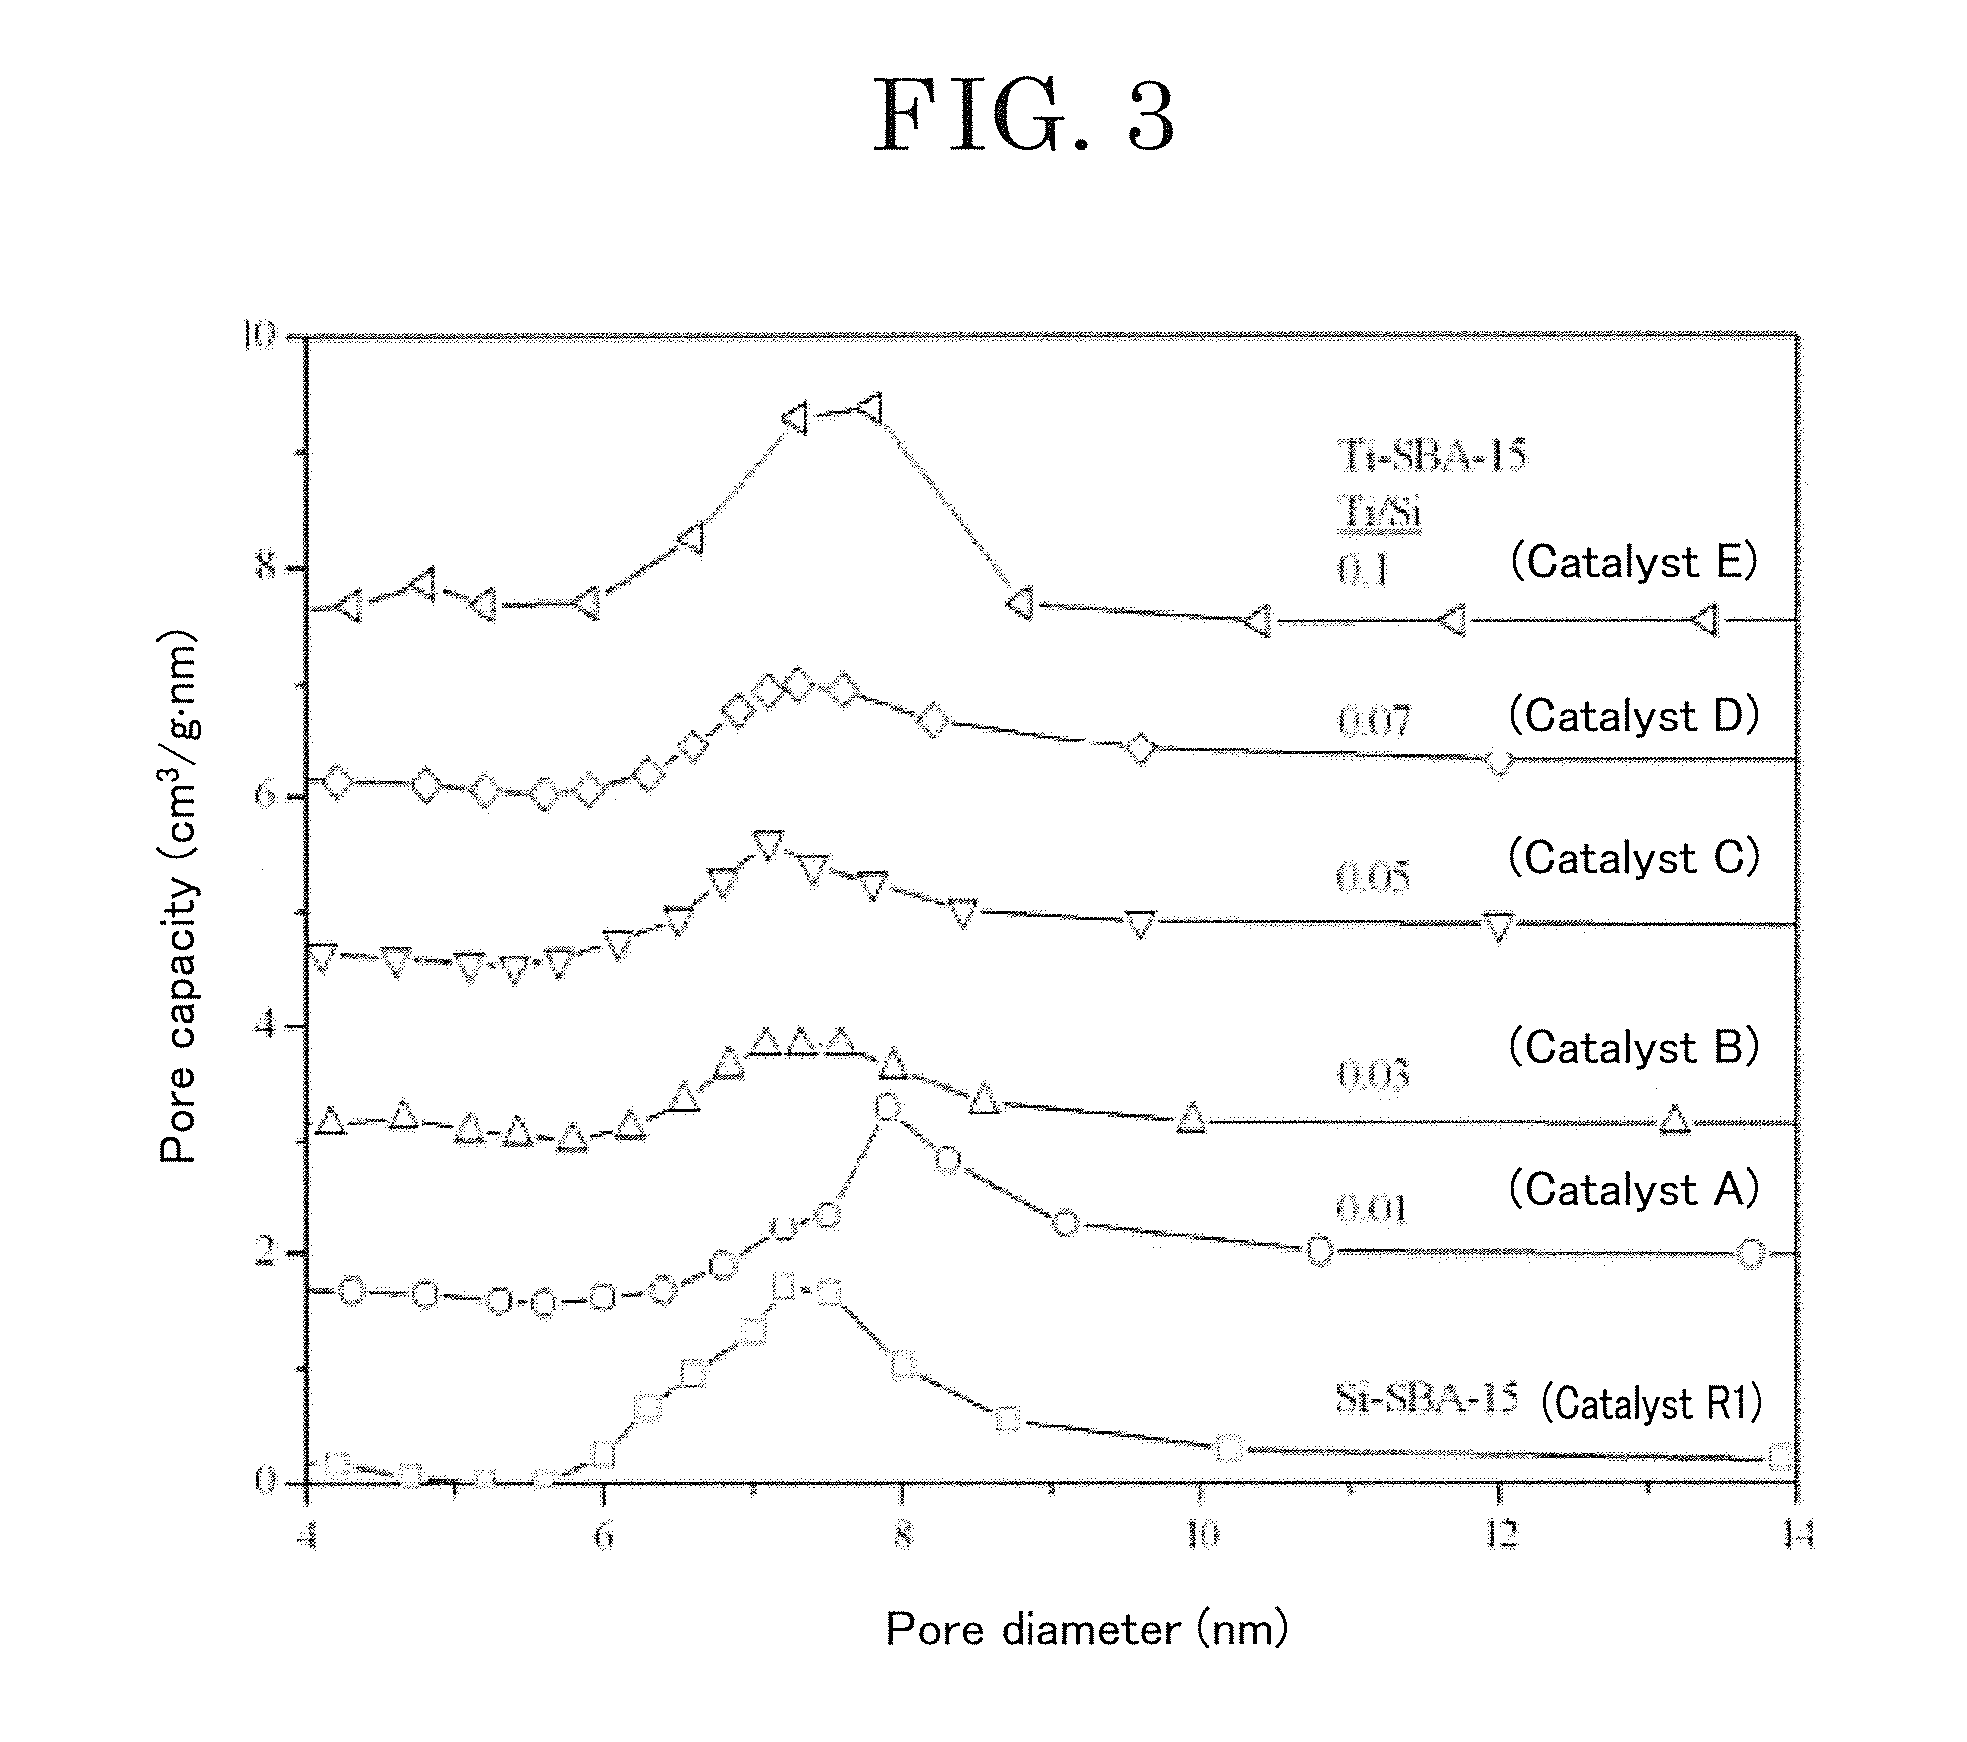 Transesterification Catalyst and Method for Producing Biodiesel Fuel Using Transesterification Catalyst